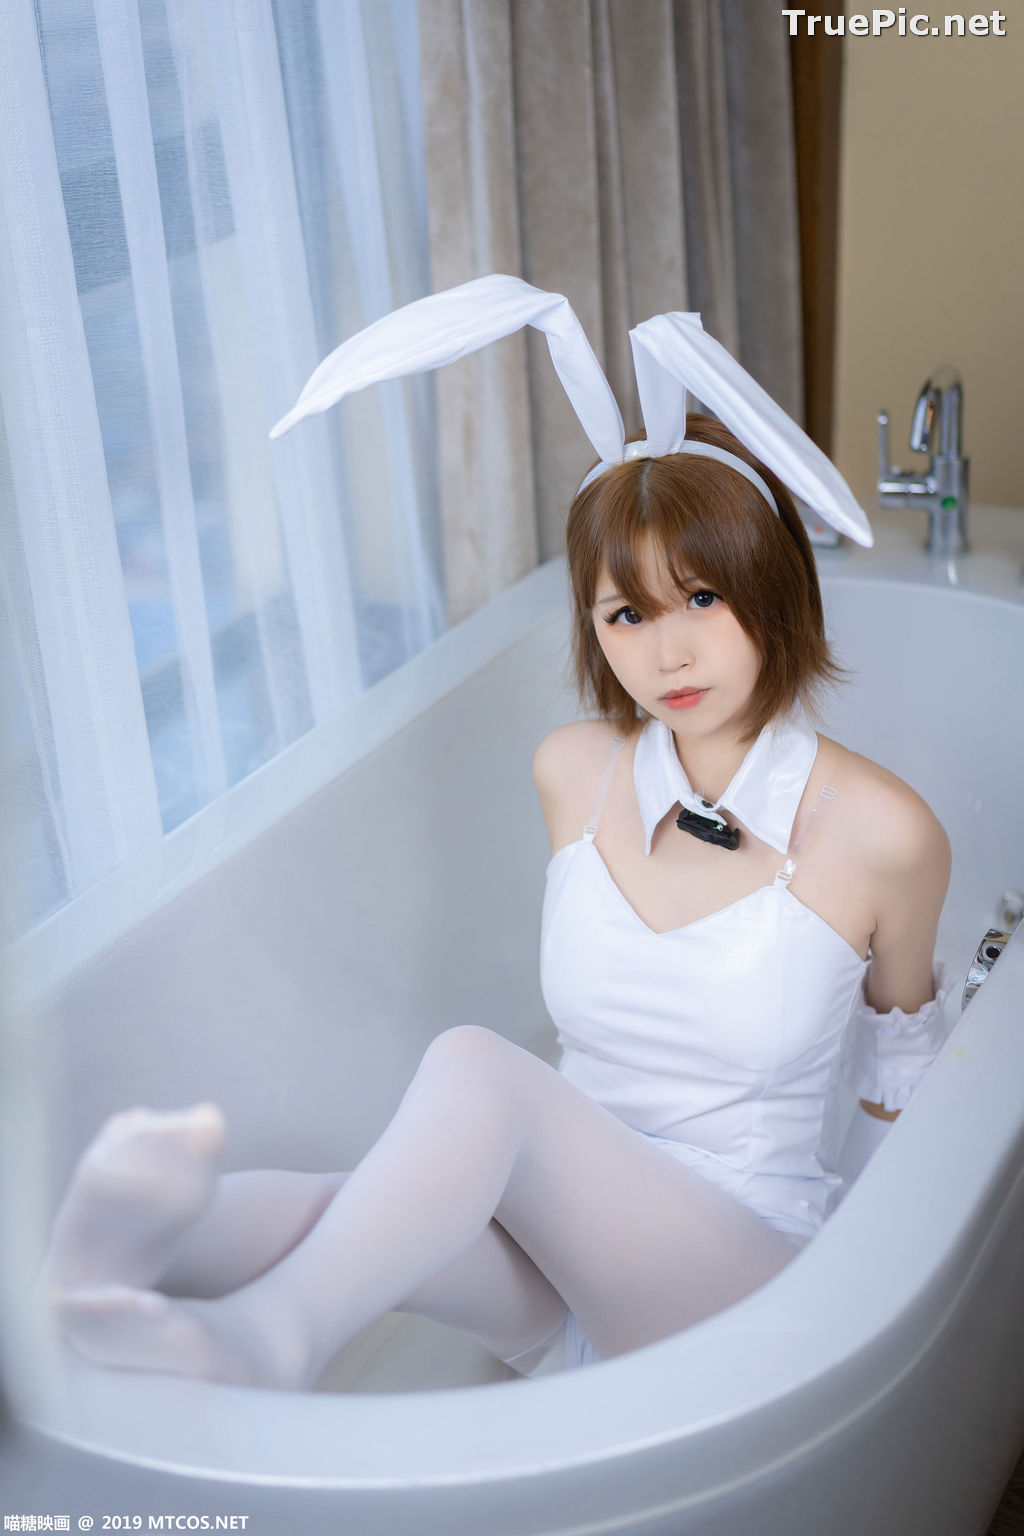 Image [MTCos] 喵糖映画 Vol.041 – Chinese Cute Model – White Bunny Girl - TruePic.net - Picture-39